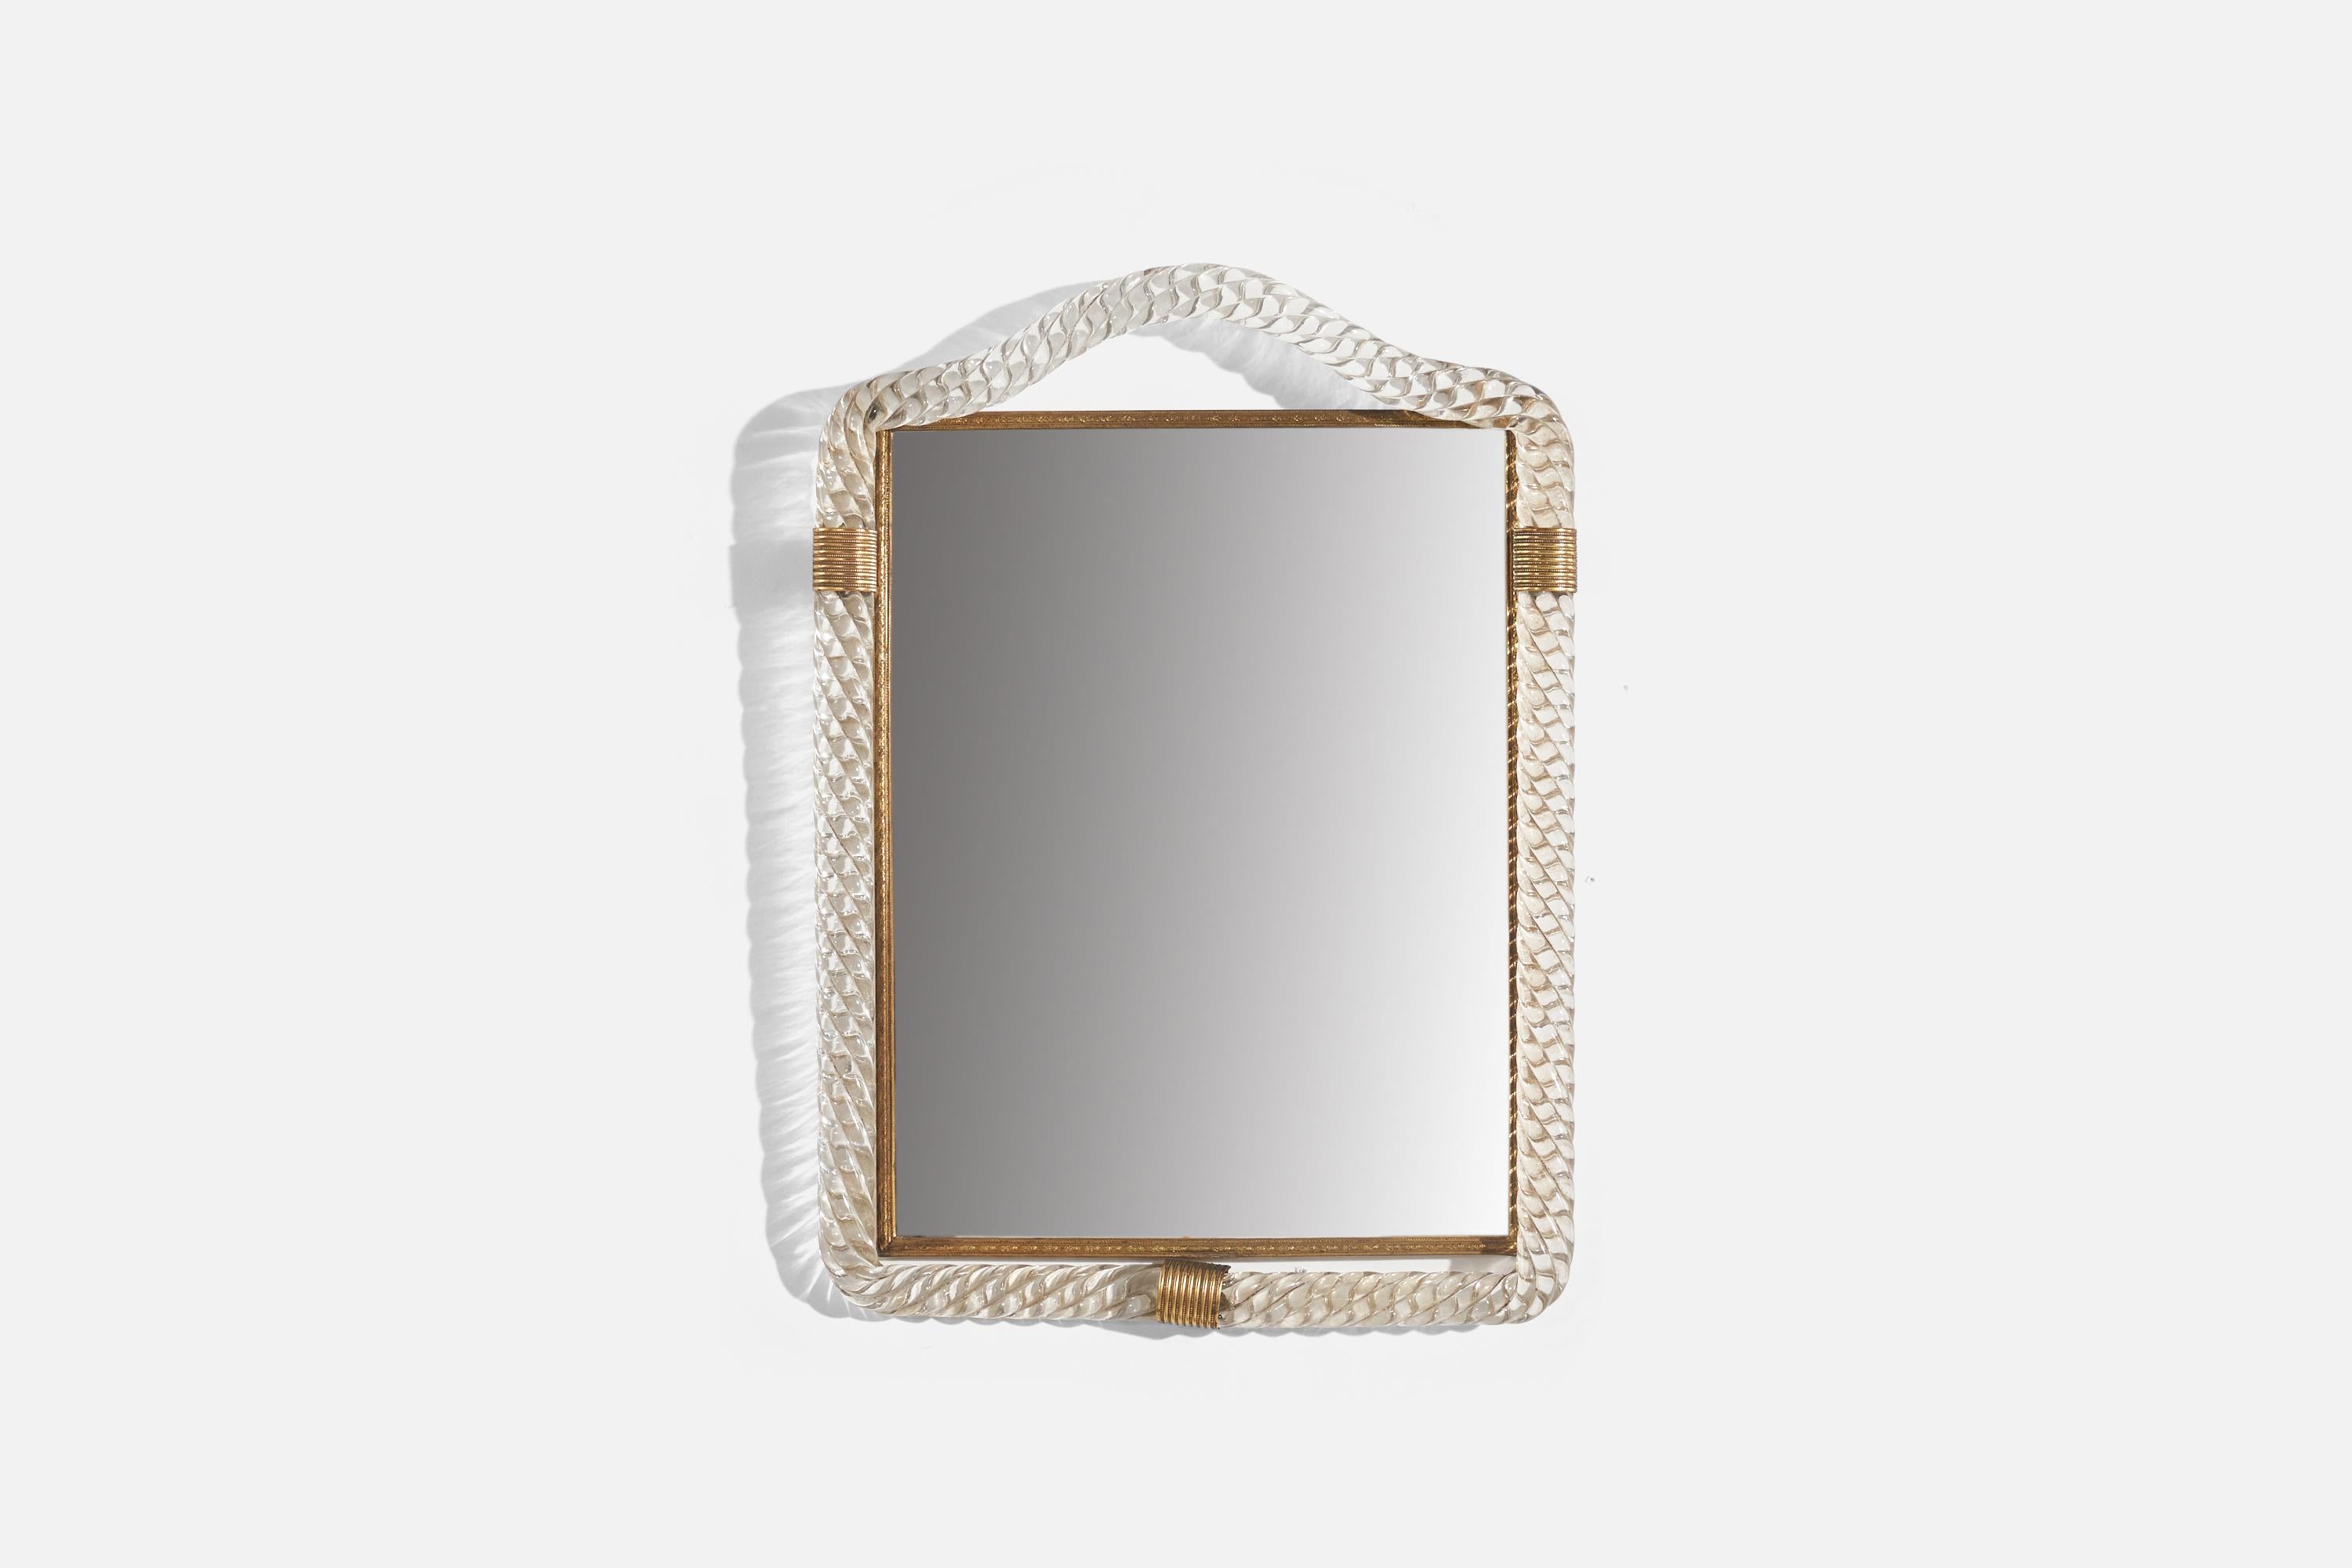 A brass and glass wall mirror designed and produced in Italy, c. 1950s.
 